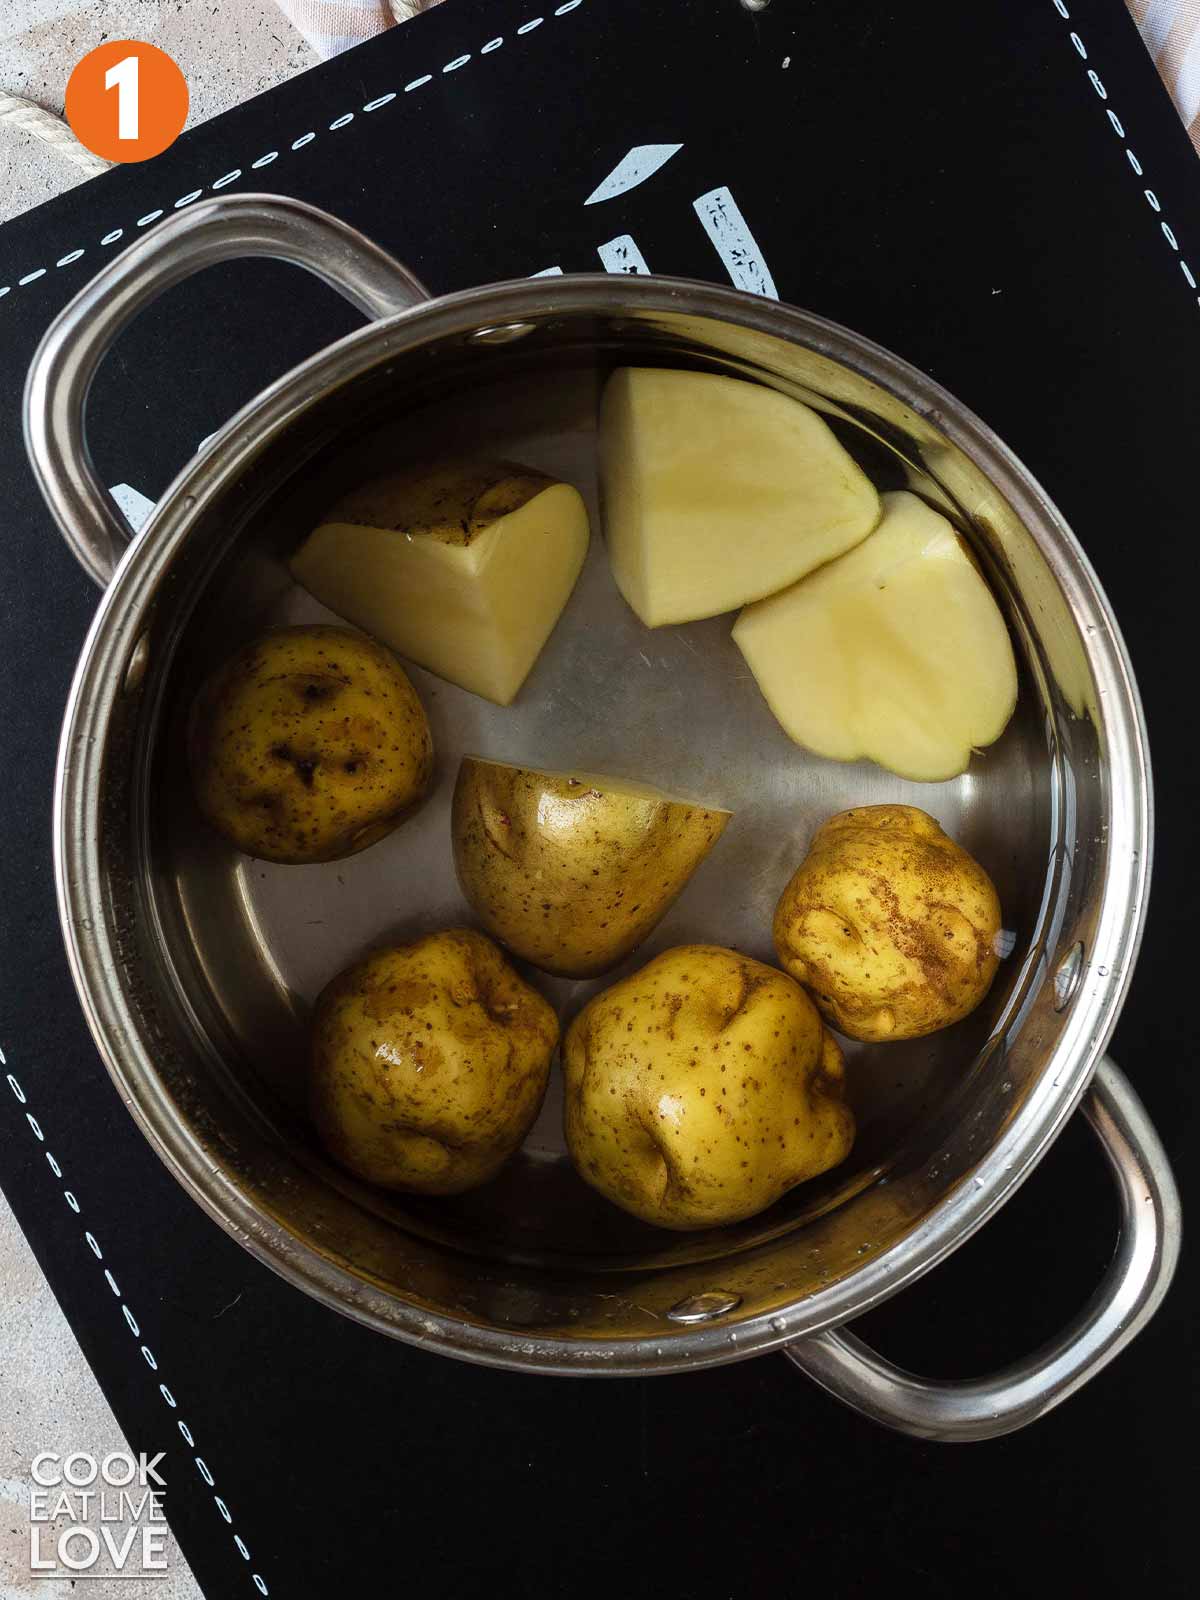 Potatoes in a pot to cook.